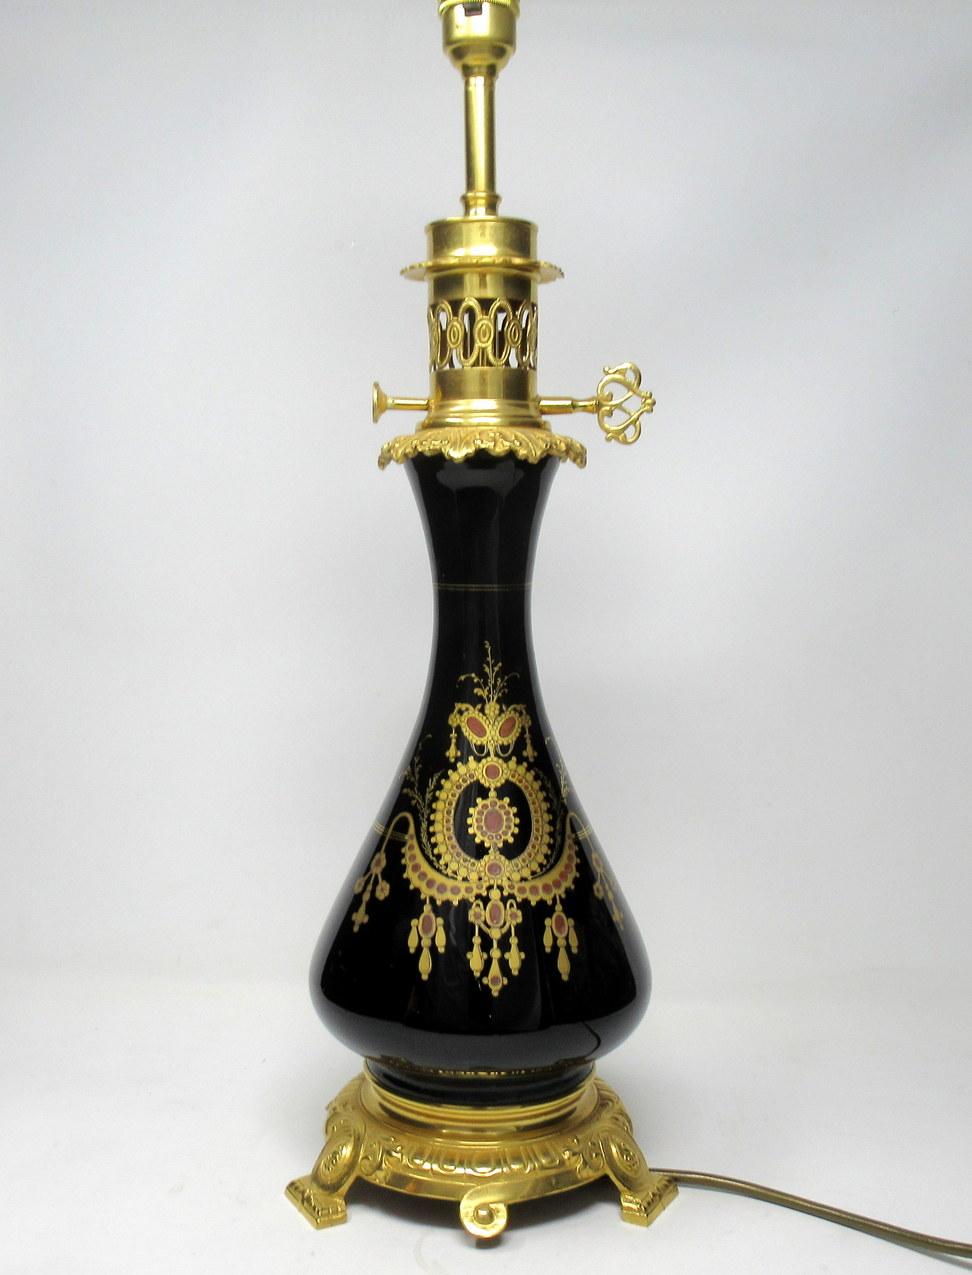 Painted Pair of French Black Enameled Glass Ormolu Table Lamps Art Nouveau, 19th Century